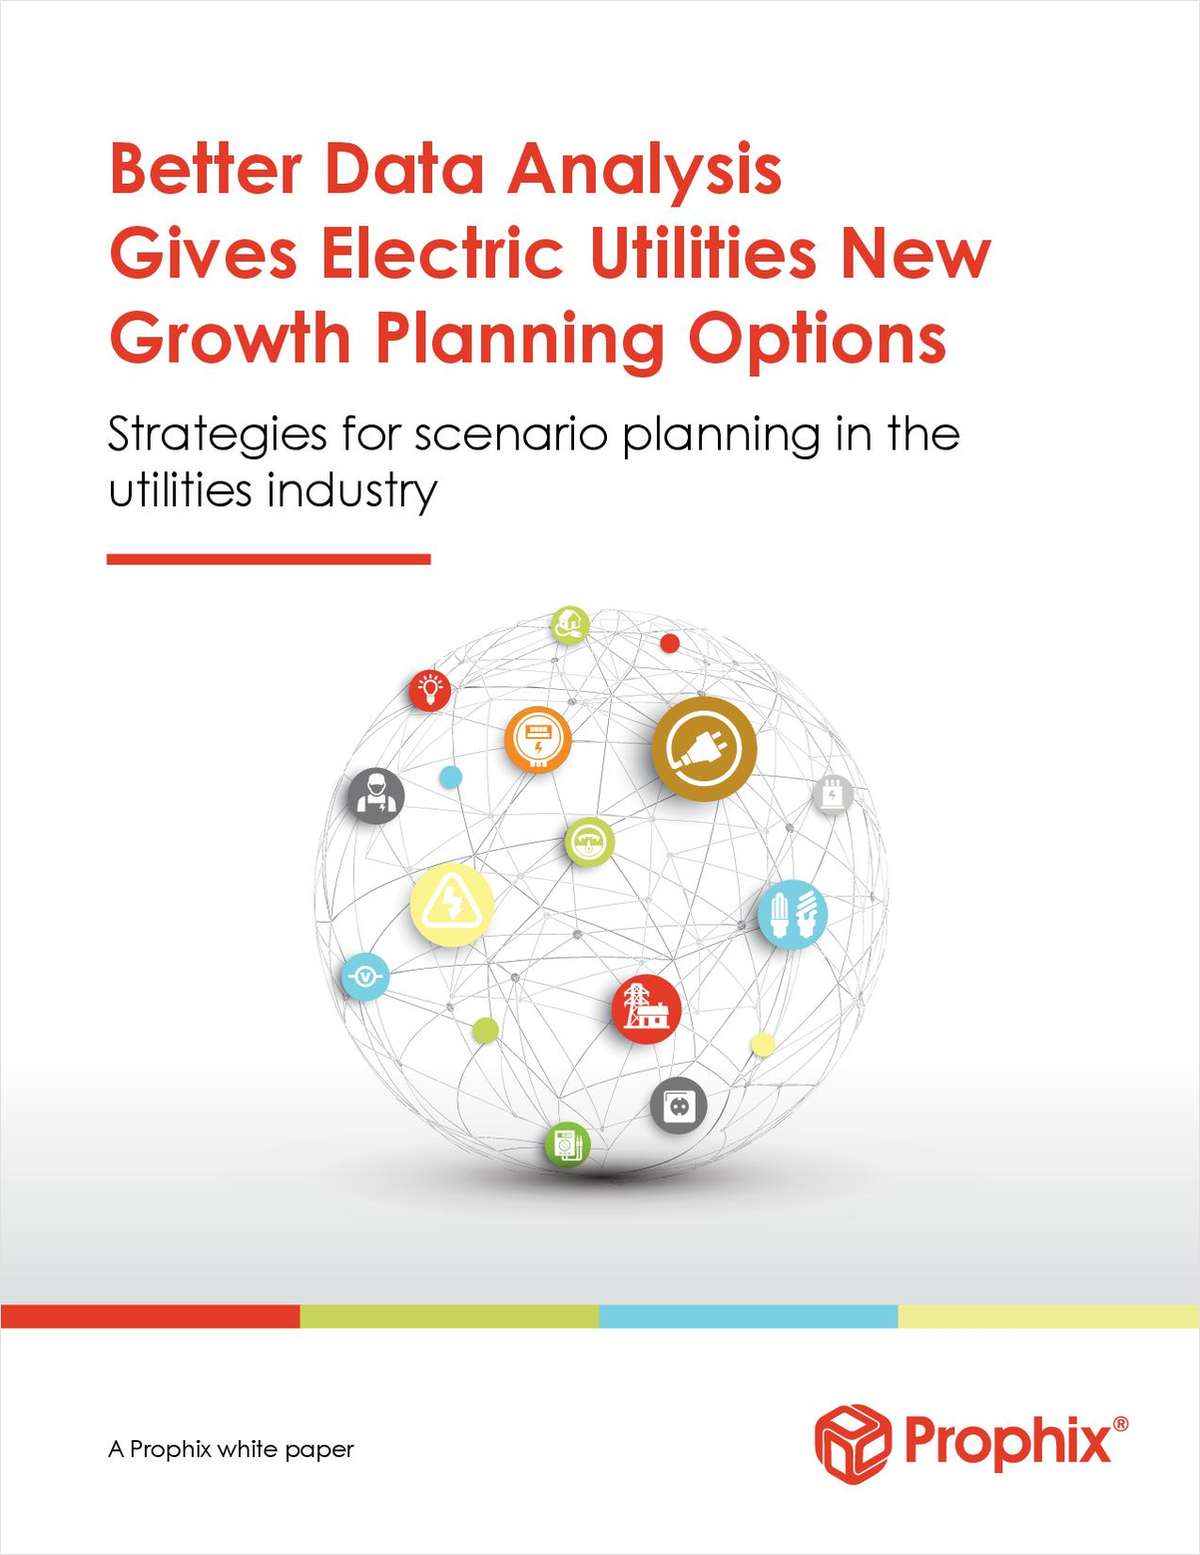 Better Data Analysis Gives Electric Utilities New Growth Planning Options